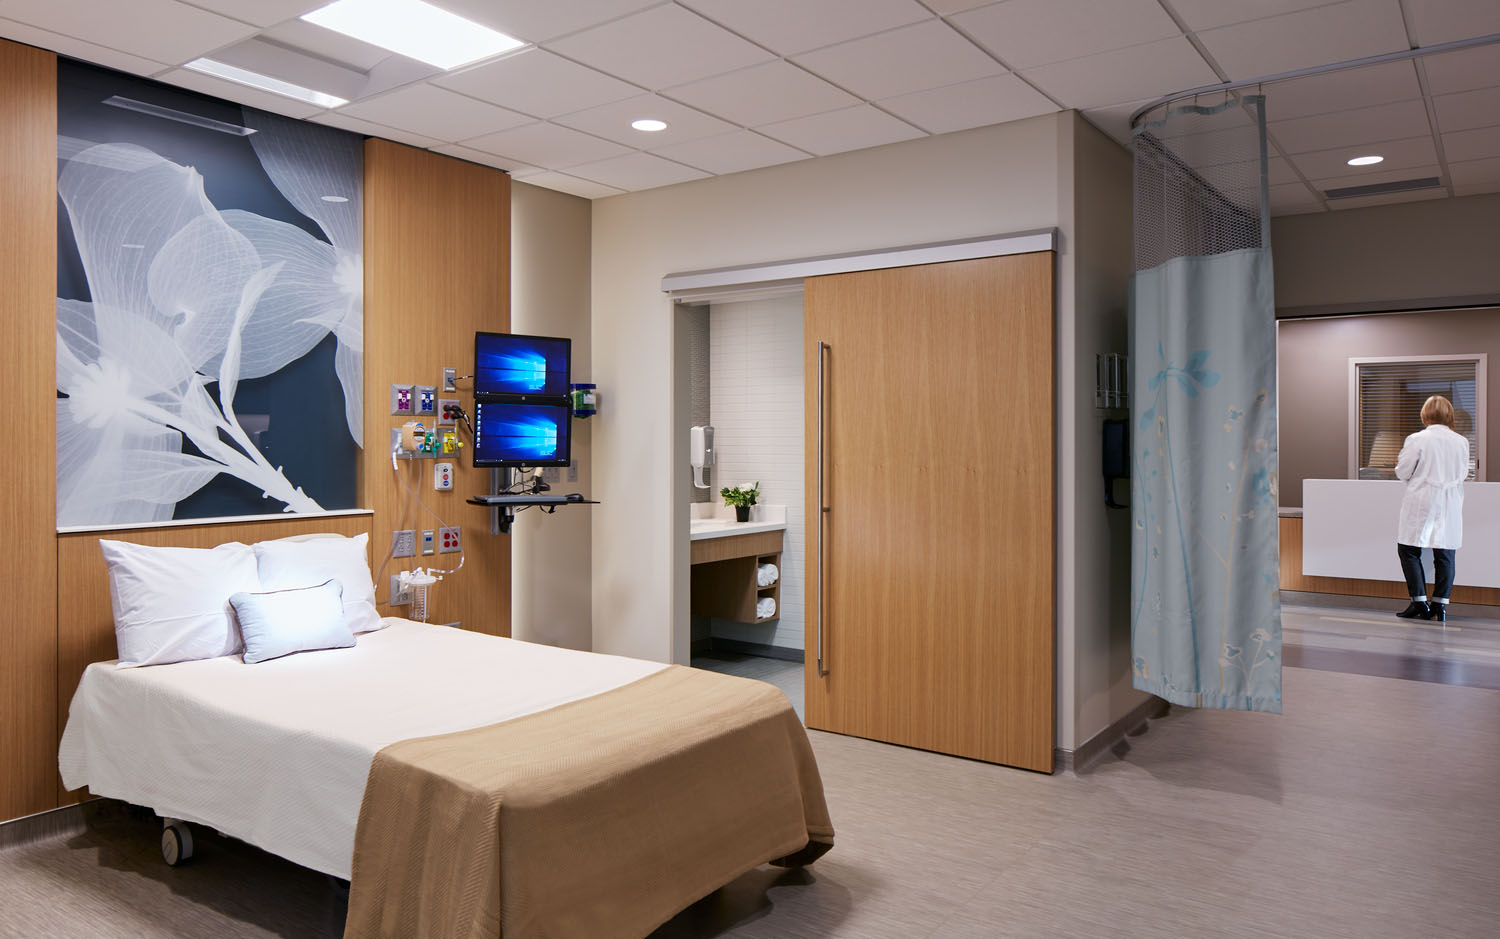 CentraCare Health System Melrose interior patient room 2